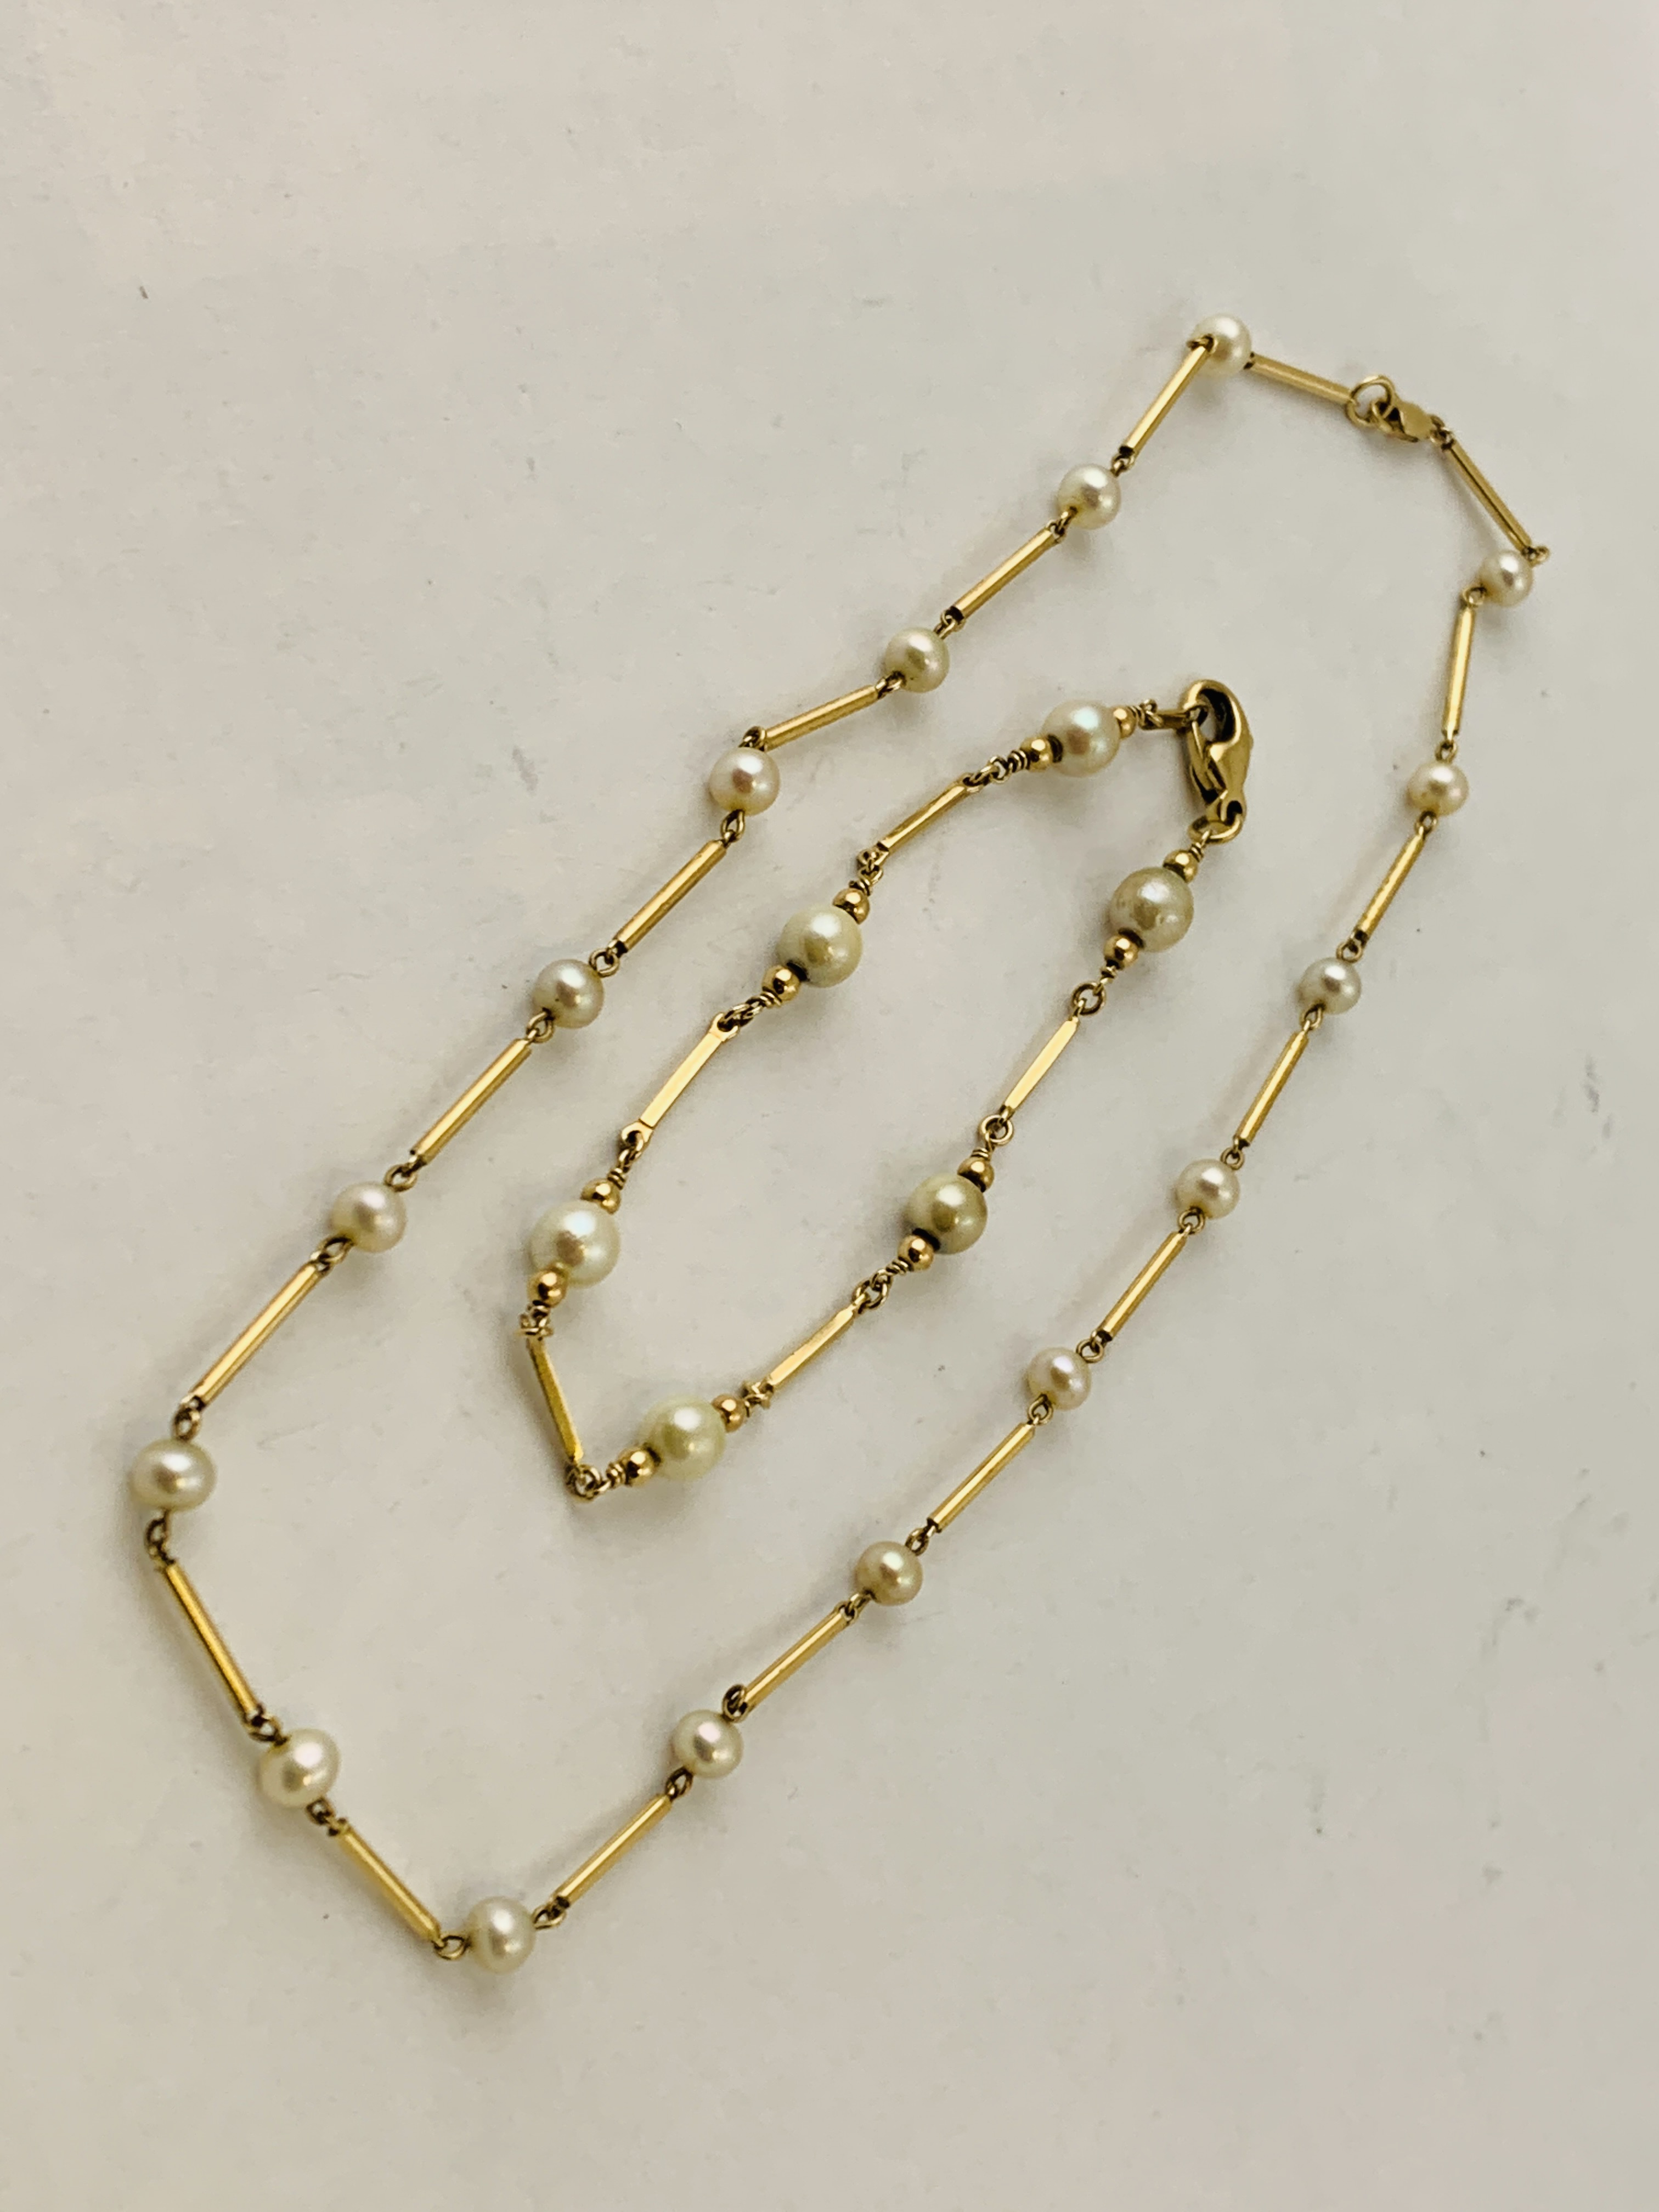 9CT GOLD NECKLACE THE BATTON LINKS DIVIDING PEARLS,